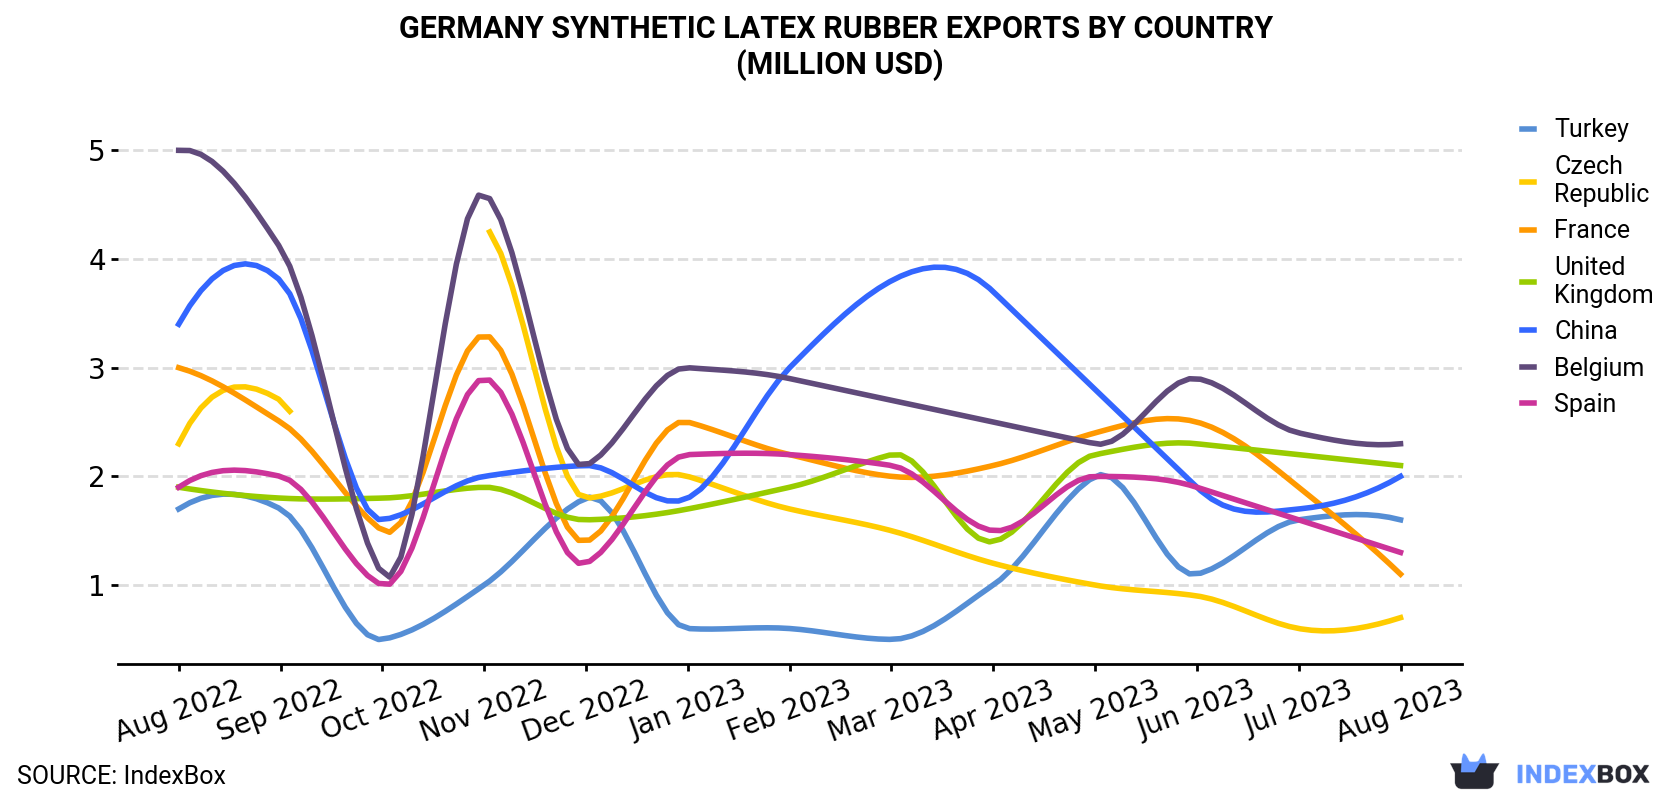 Germany Synthetic Latex Rubber Exports By Country (Million USD)